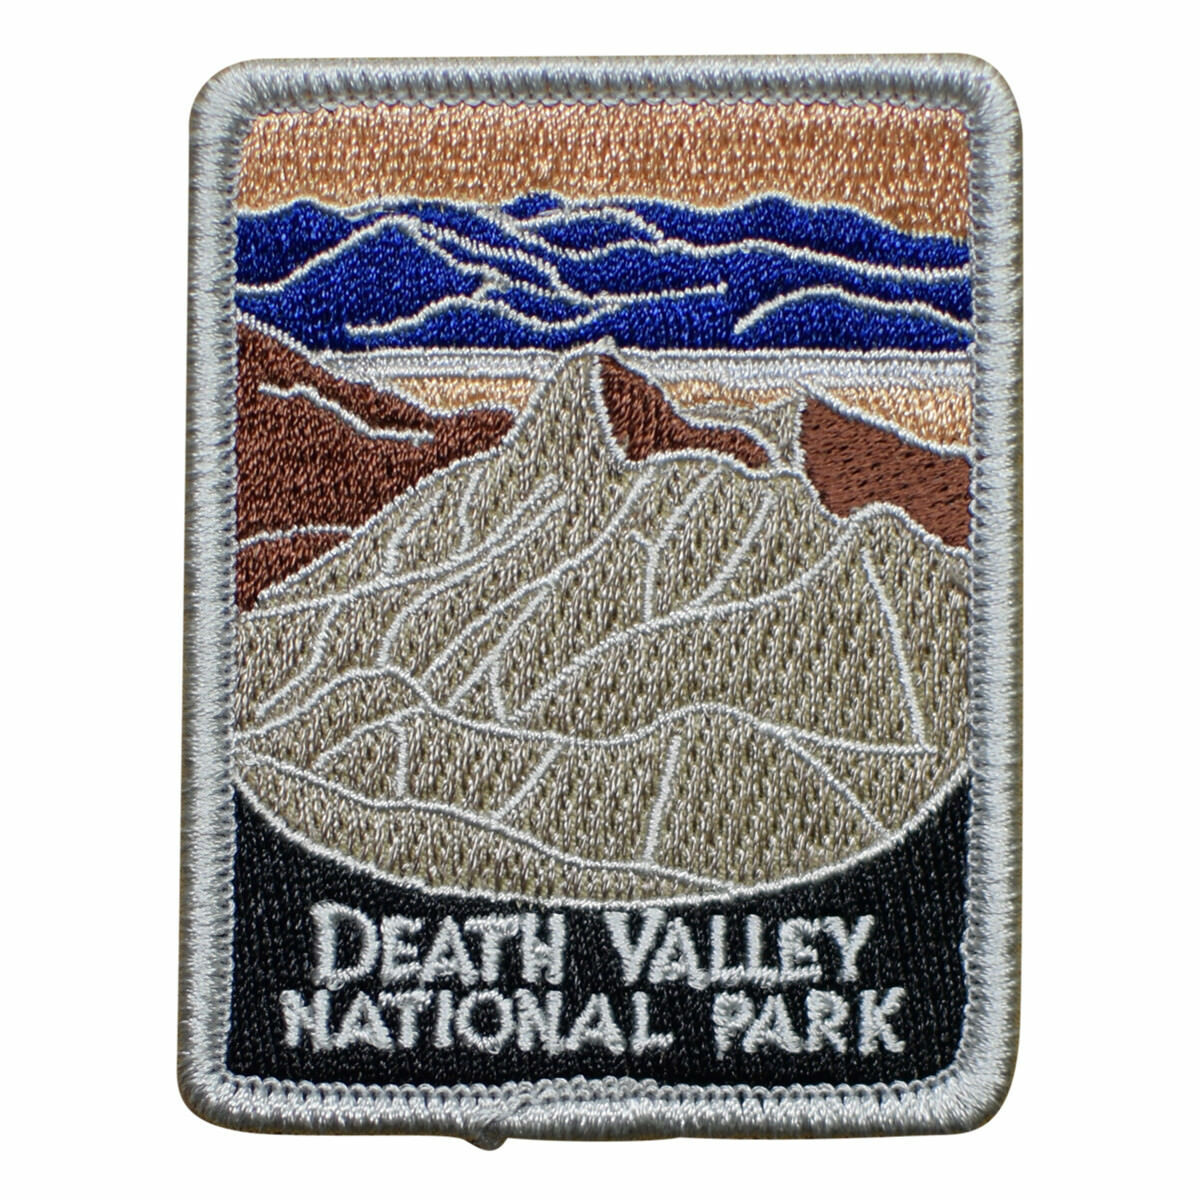 Death Valley National Park Patch - California, Nevada, Desert Badge 3 (Iron on)